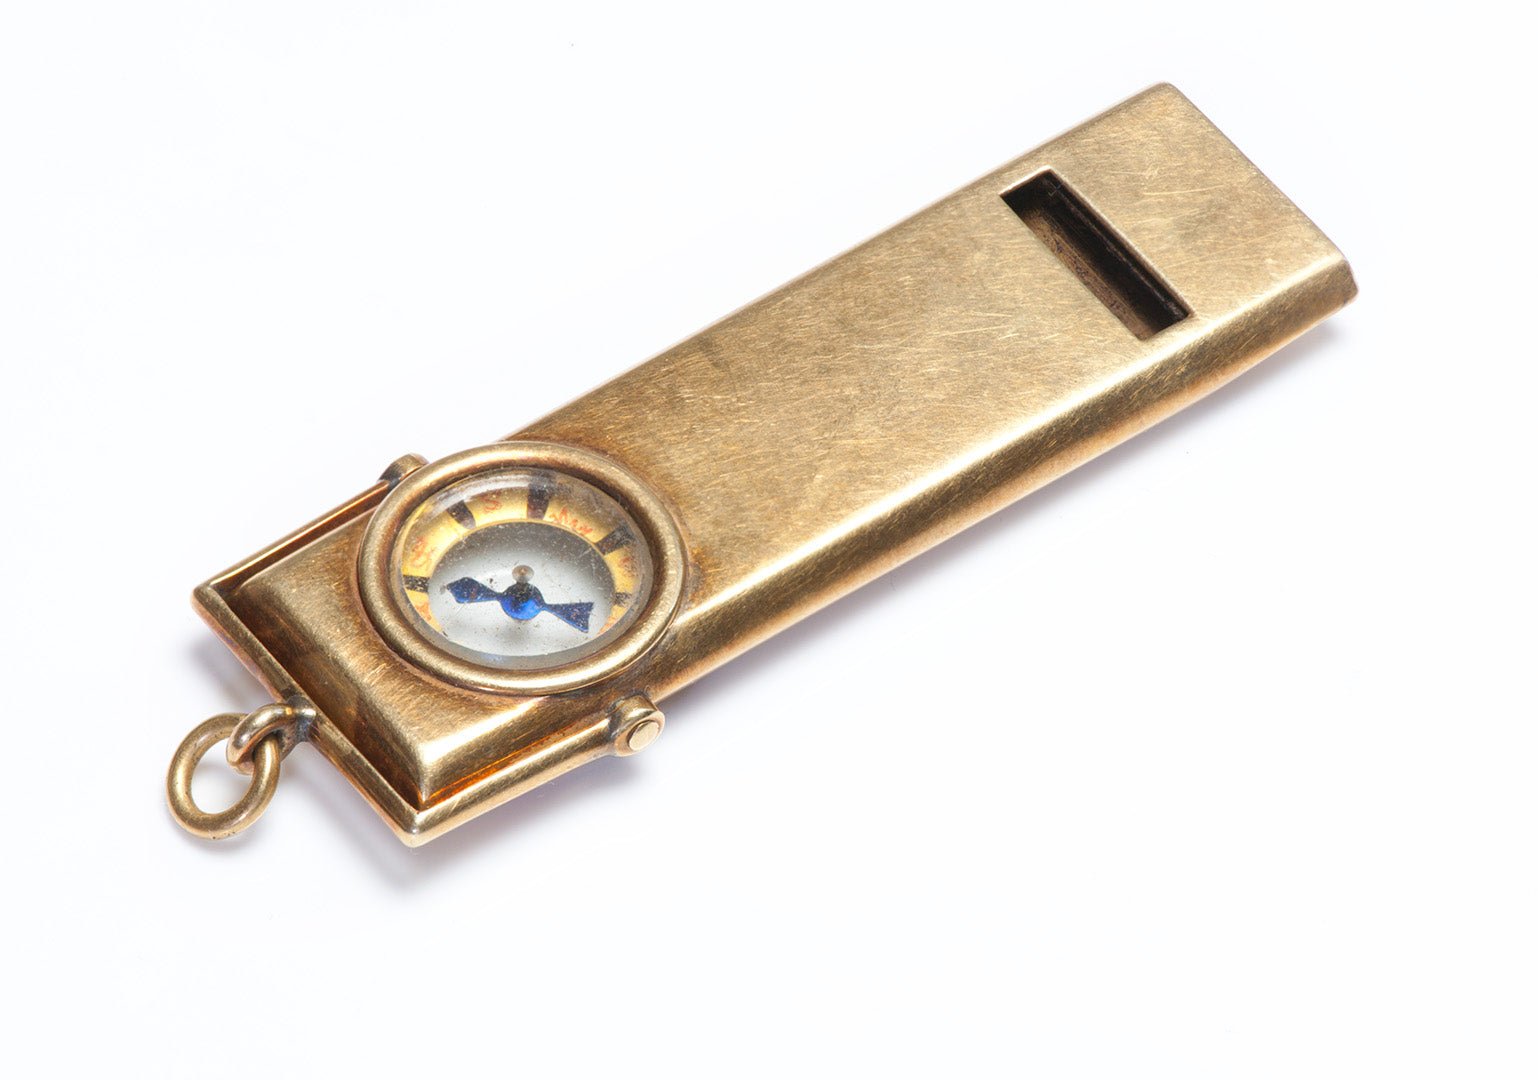 Antique Gold Whistle with Compass Pendant Fob